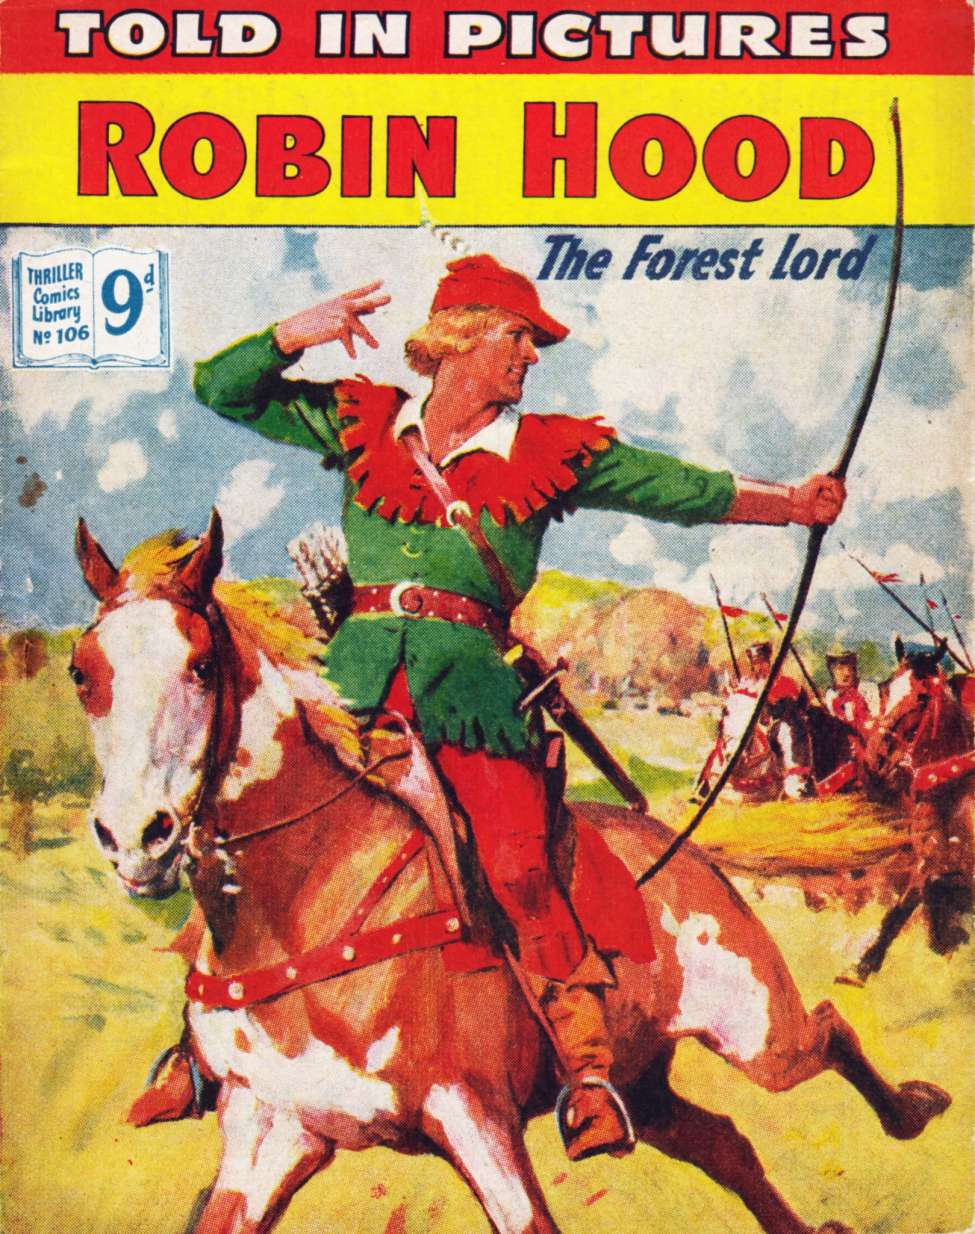 Book Cover For Thriller Comics Library 106 - Robin Hood